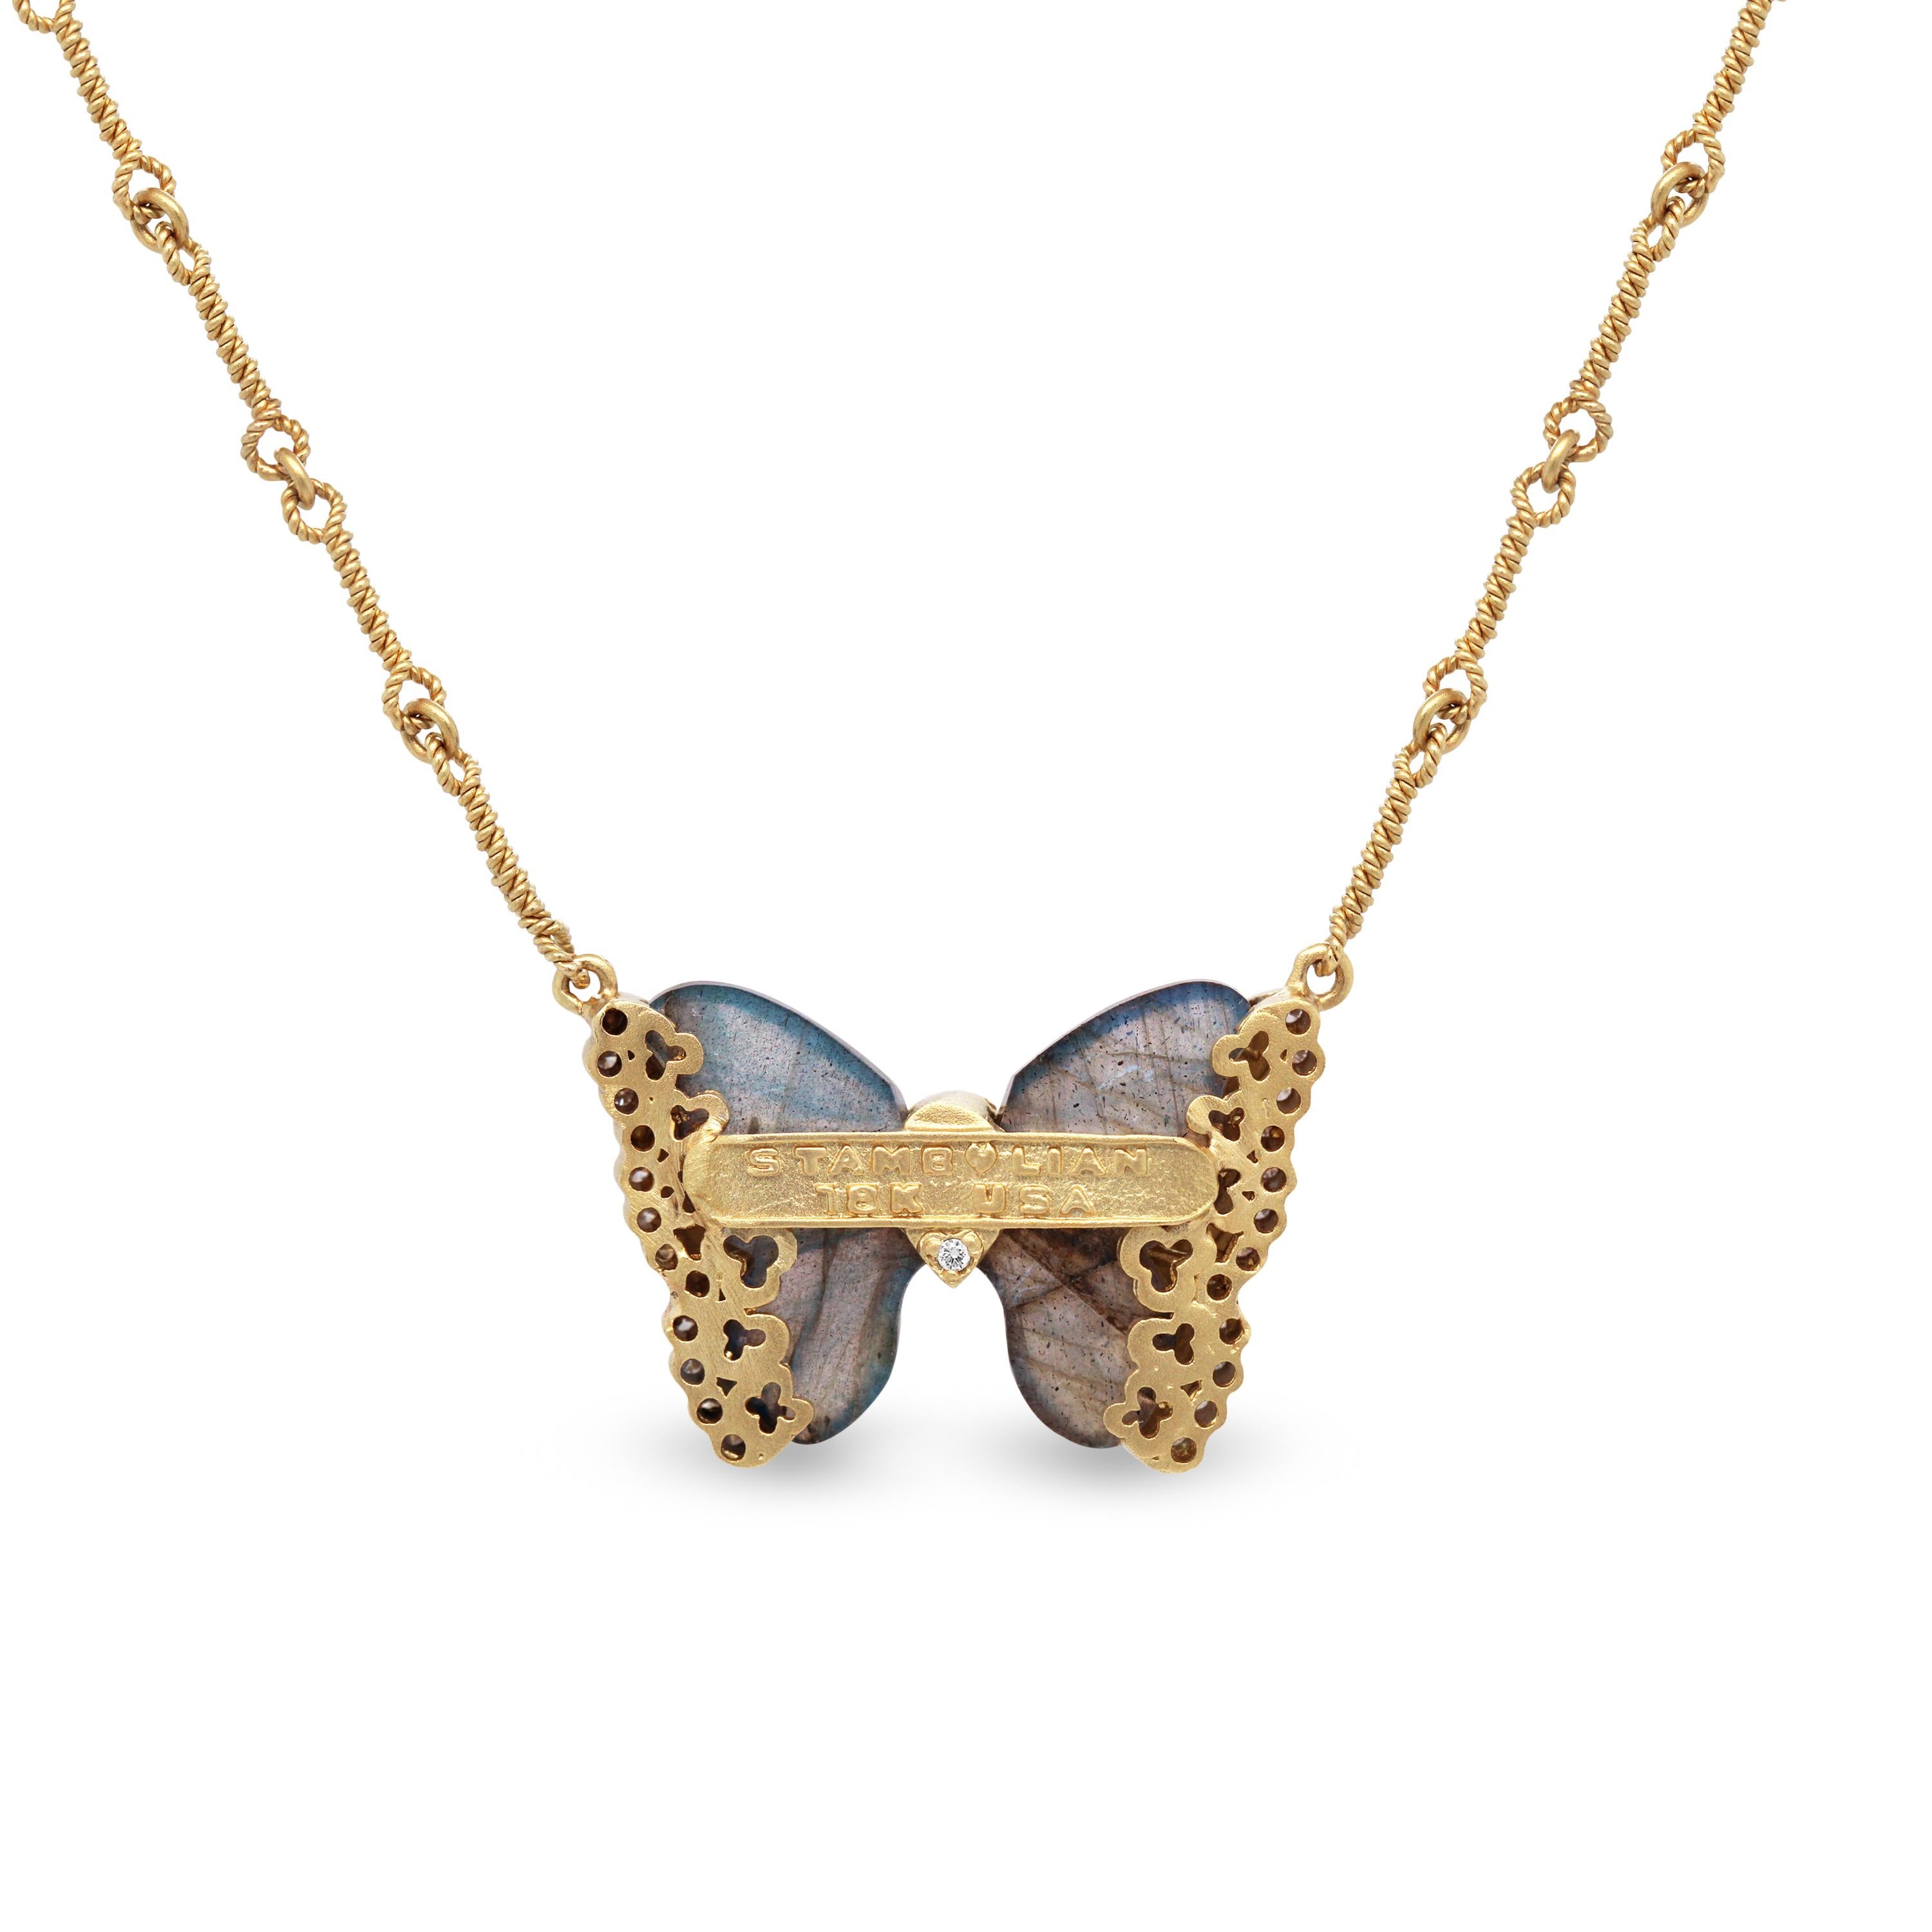 Stambolian 18K Yellow Gold Diamond Black Enamel Butterfly Pendant Necklace

This butterfly is from the 2020 Spring Stambolian collection and features two special cut Labradorites framed with black enamel and diamonds

Apprx. 15 carat Labradorite